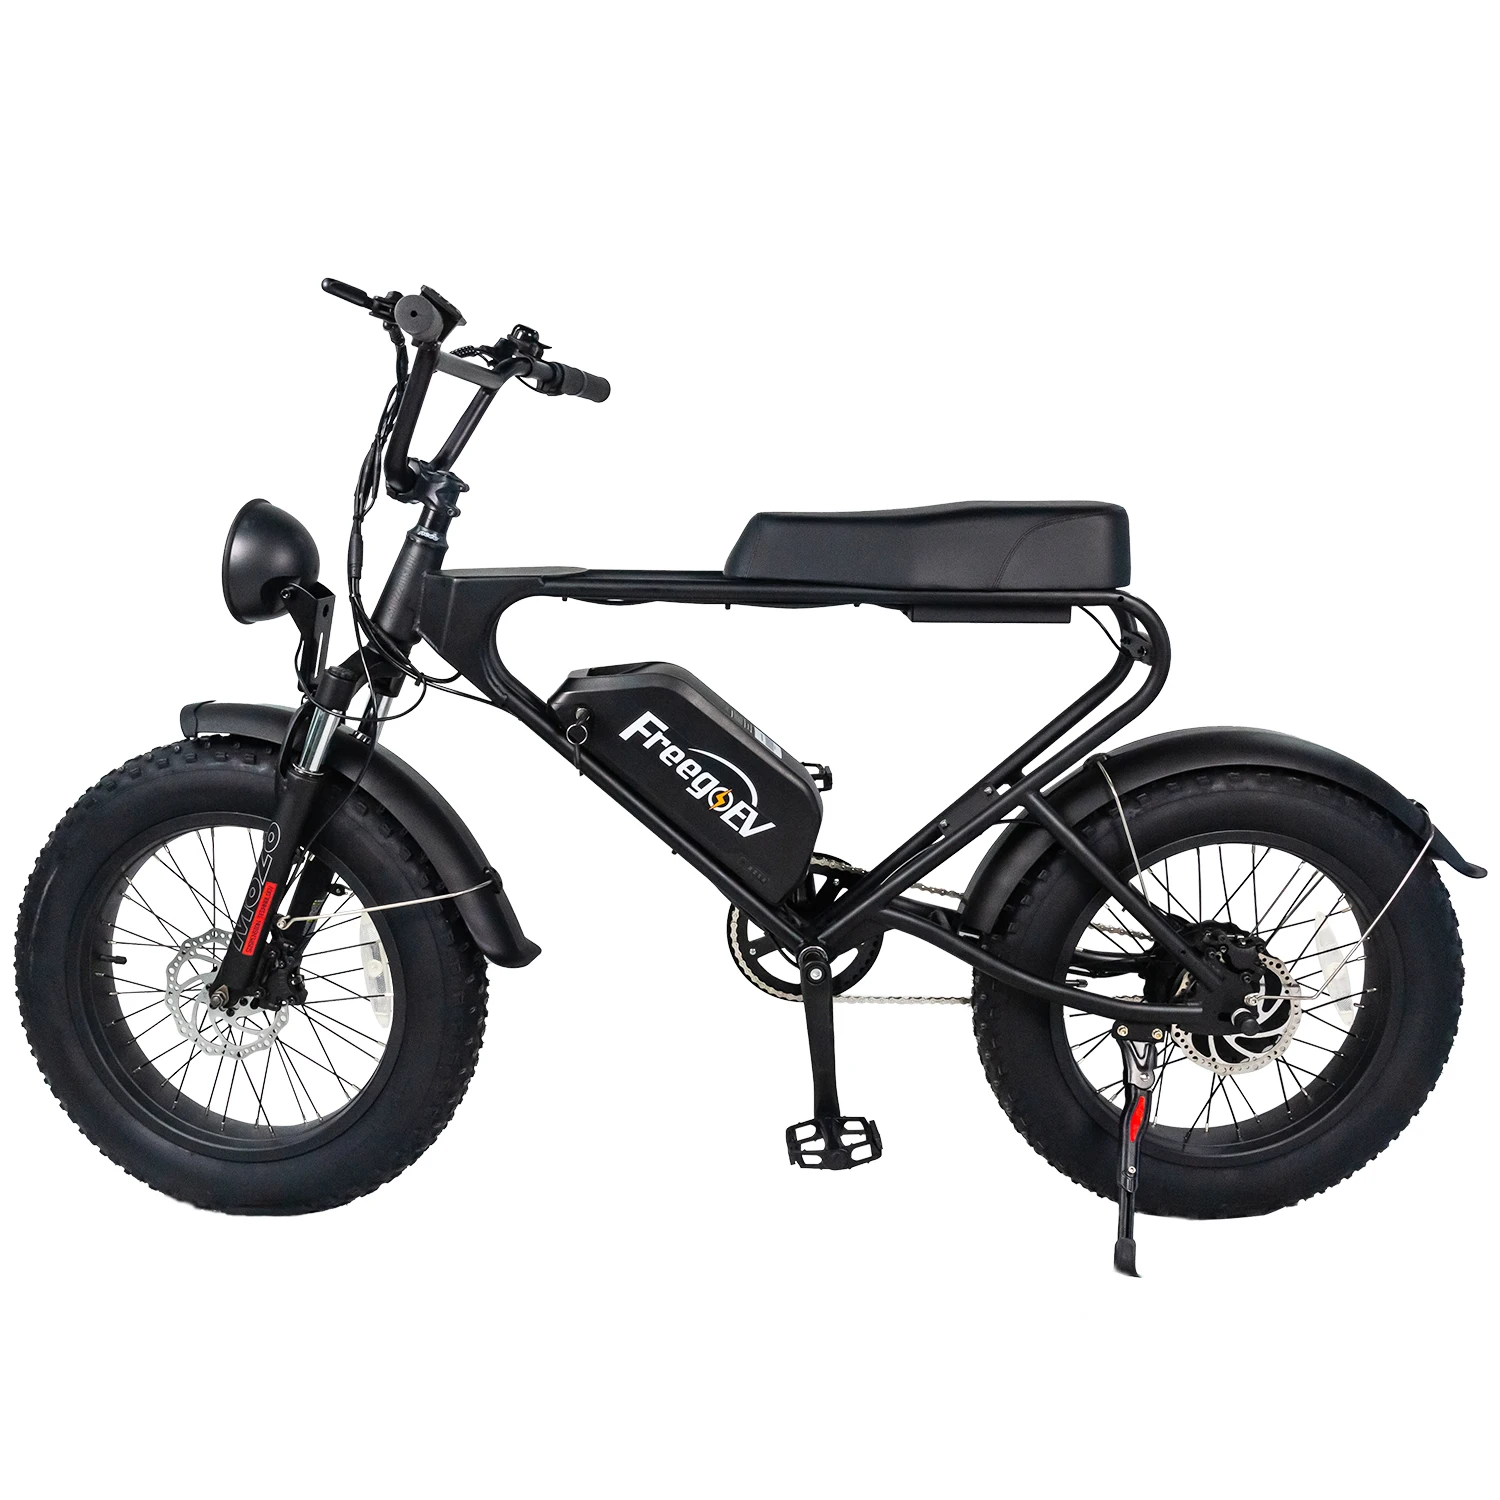 

USA Warehouse New Model 1200W 48V 20Ah Off Road Motor Fast Powerful Electric fat tire Bicycle Bike For Adults